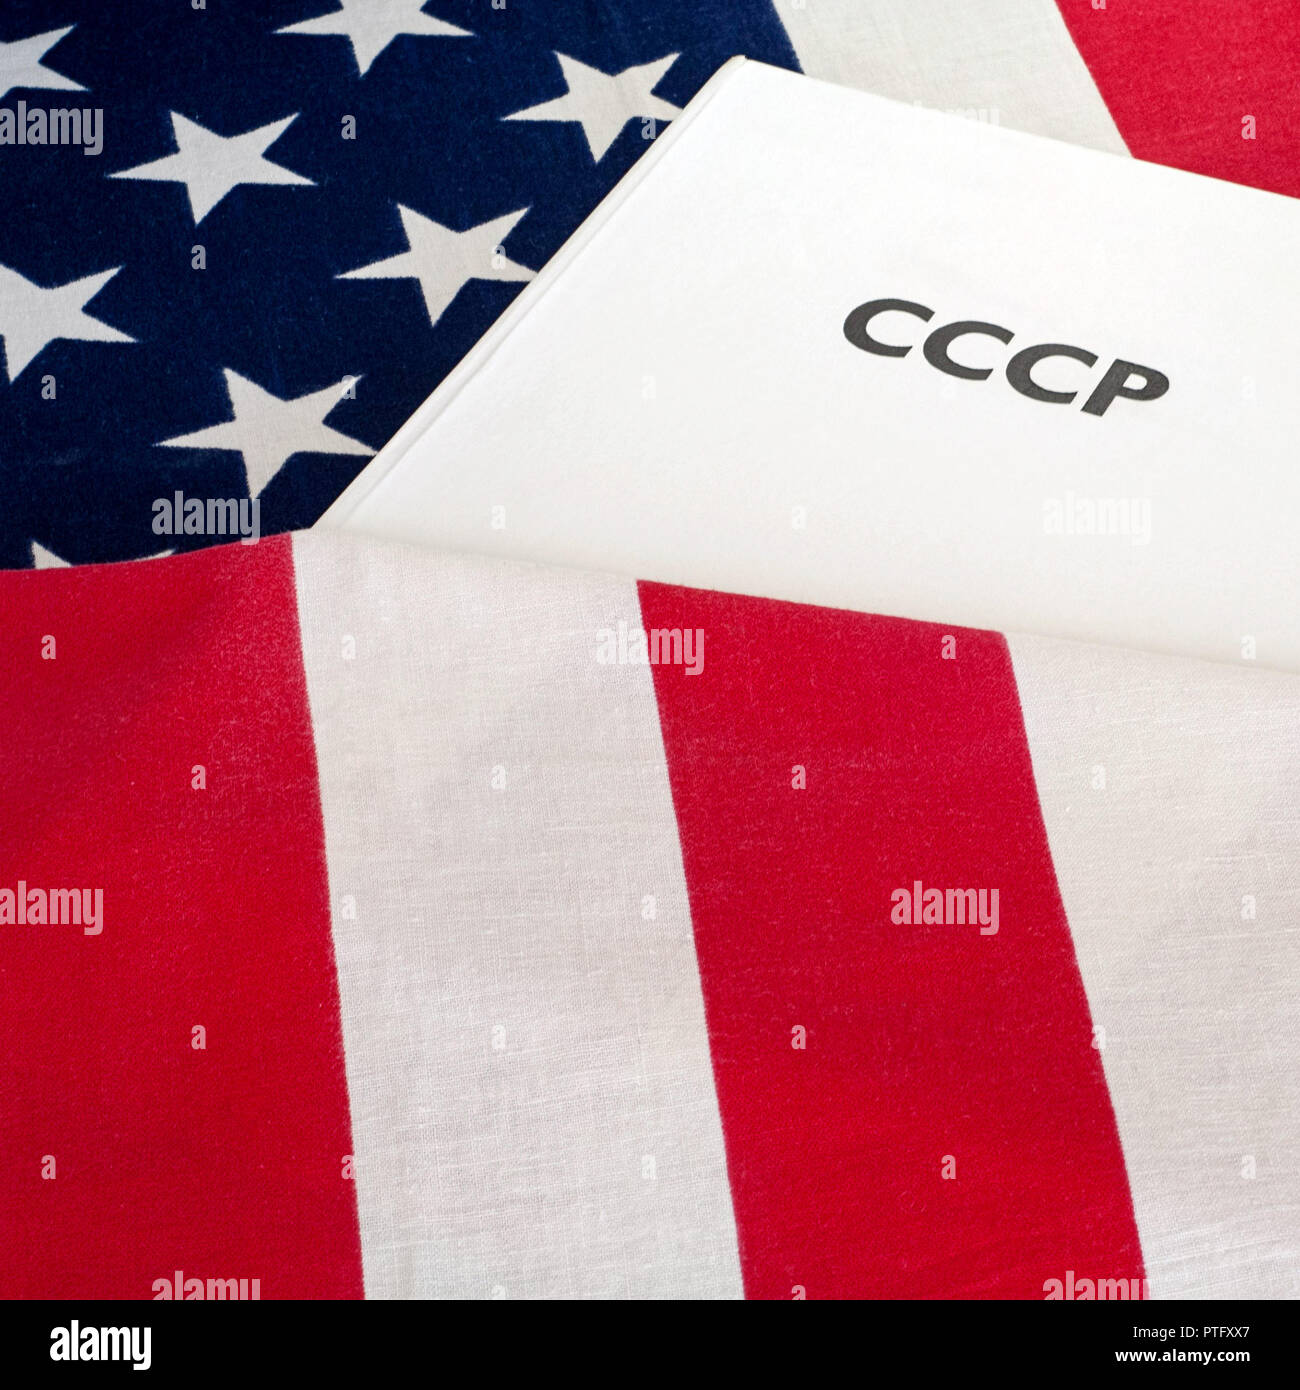 cold war  USA and USSR, CCCP written on the book, flag baground Stock Photo